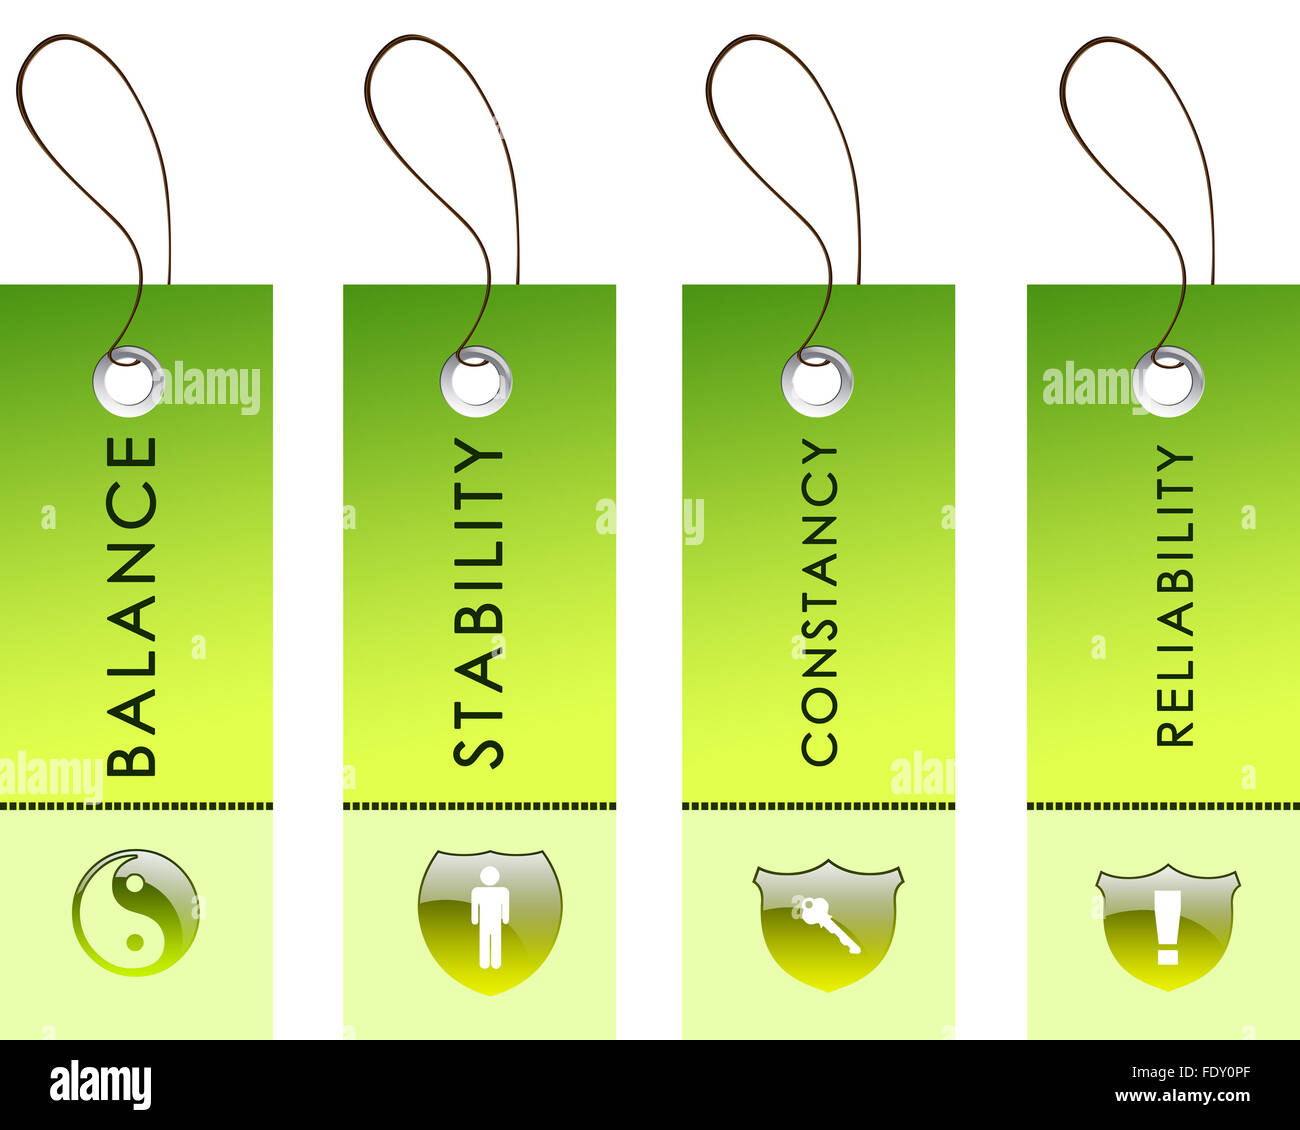 green labels with nature protection symbols on them Stock Photo